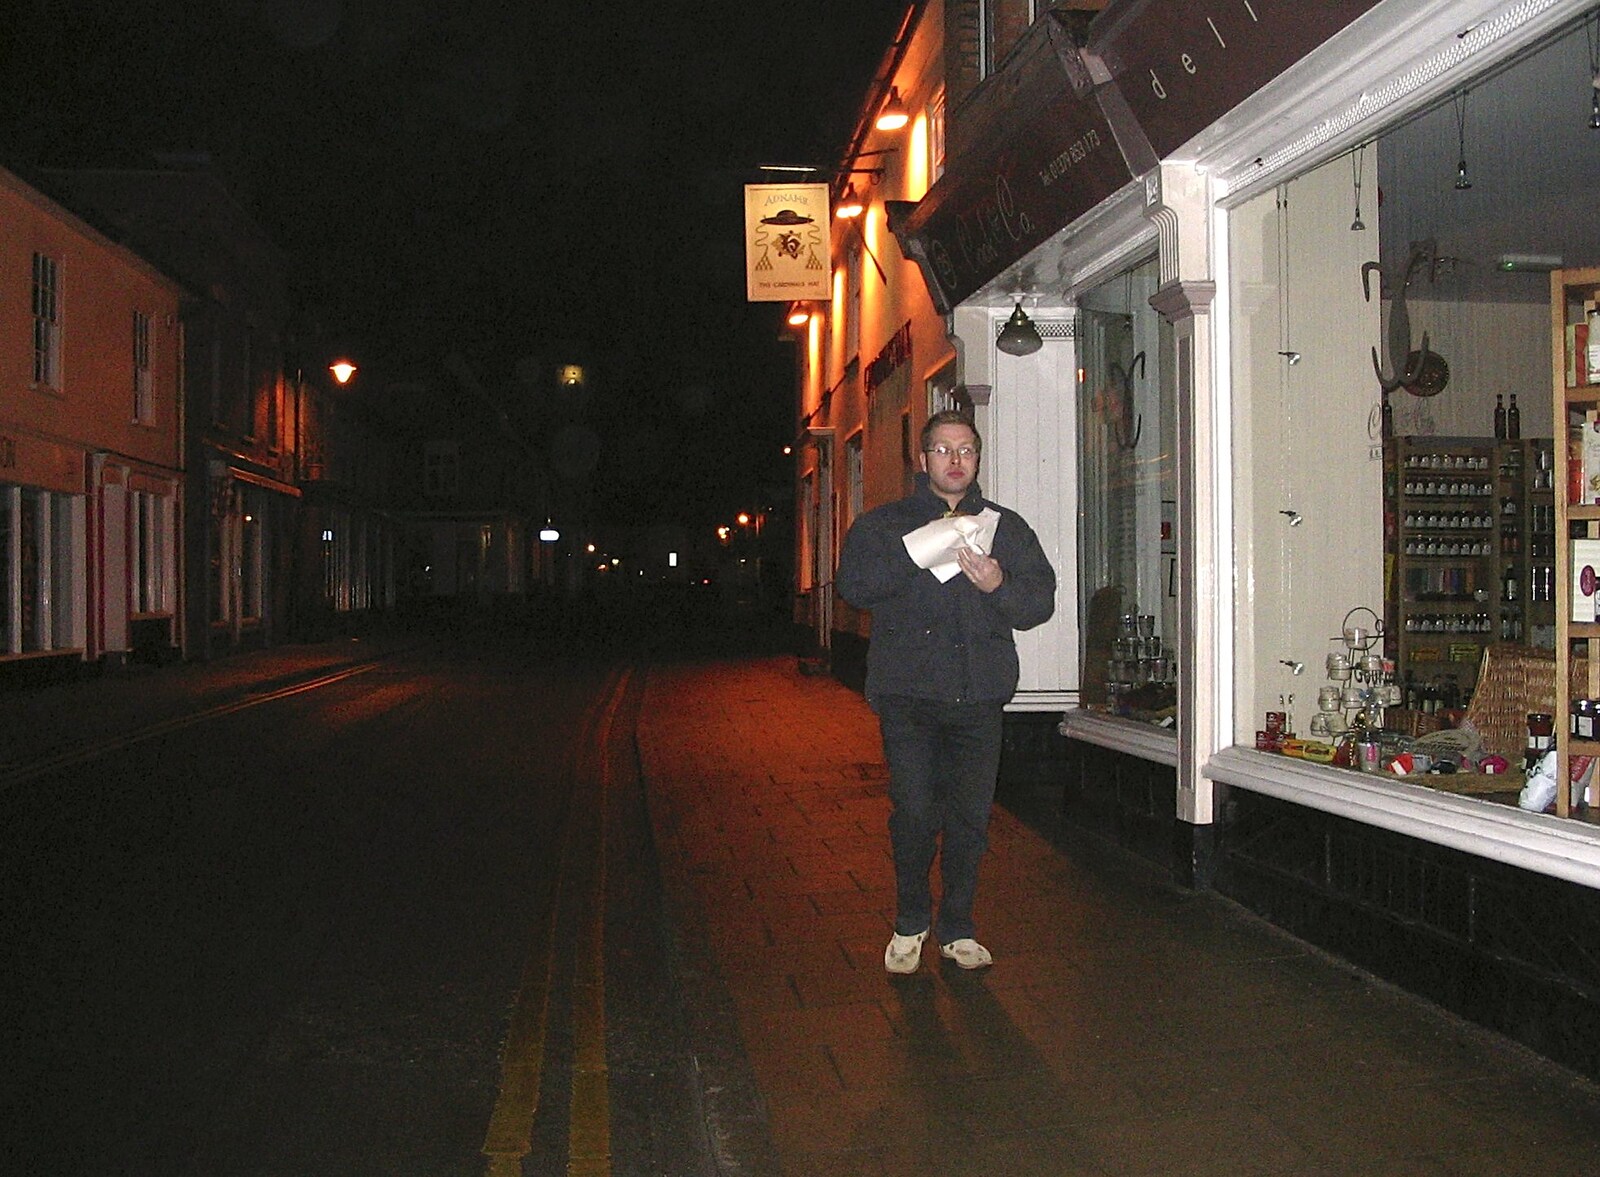 Marc walks past the Cardinal's Hat pub from Dom in da Chapel, Safeway Chickens and Evil Supermarkets, Harleston and Grimston - 15th January 2006